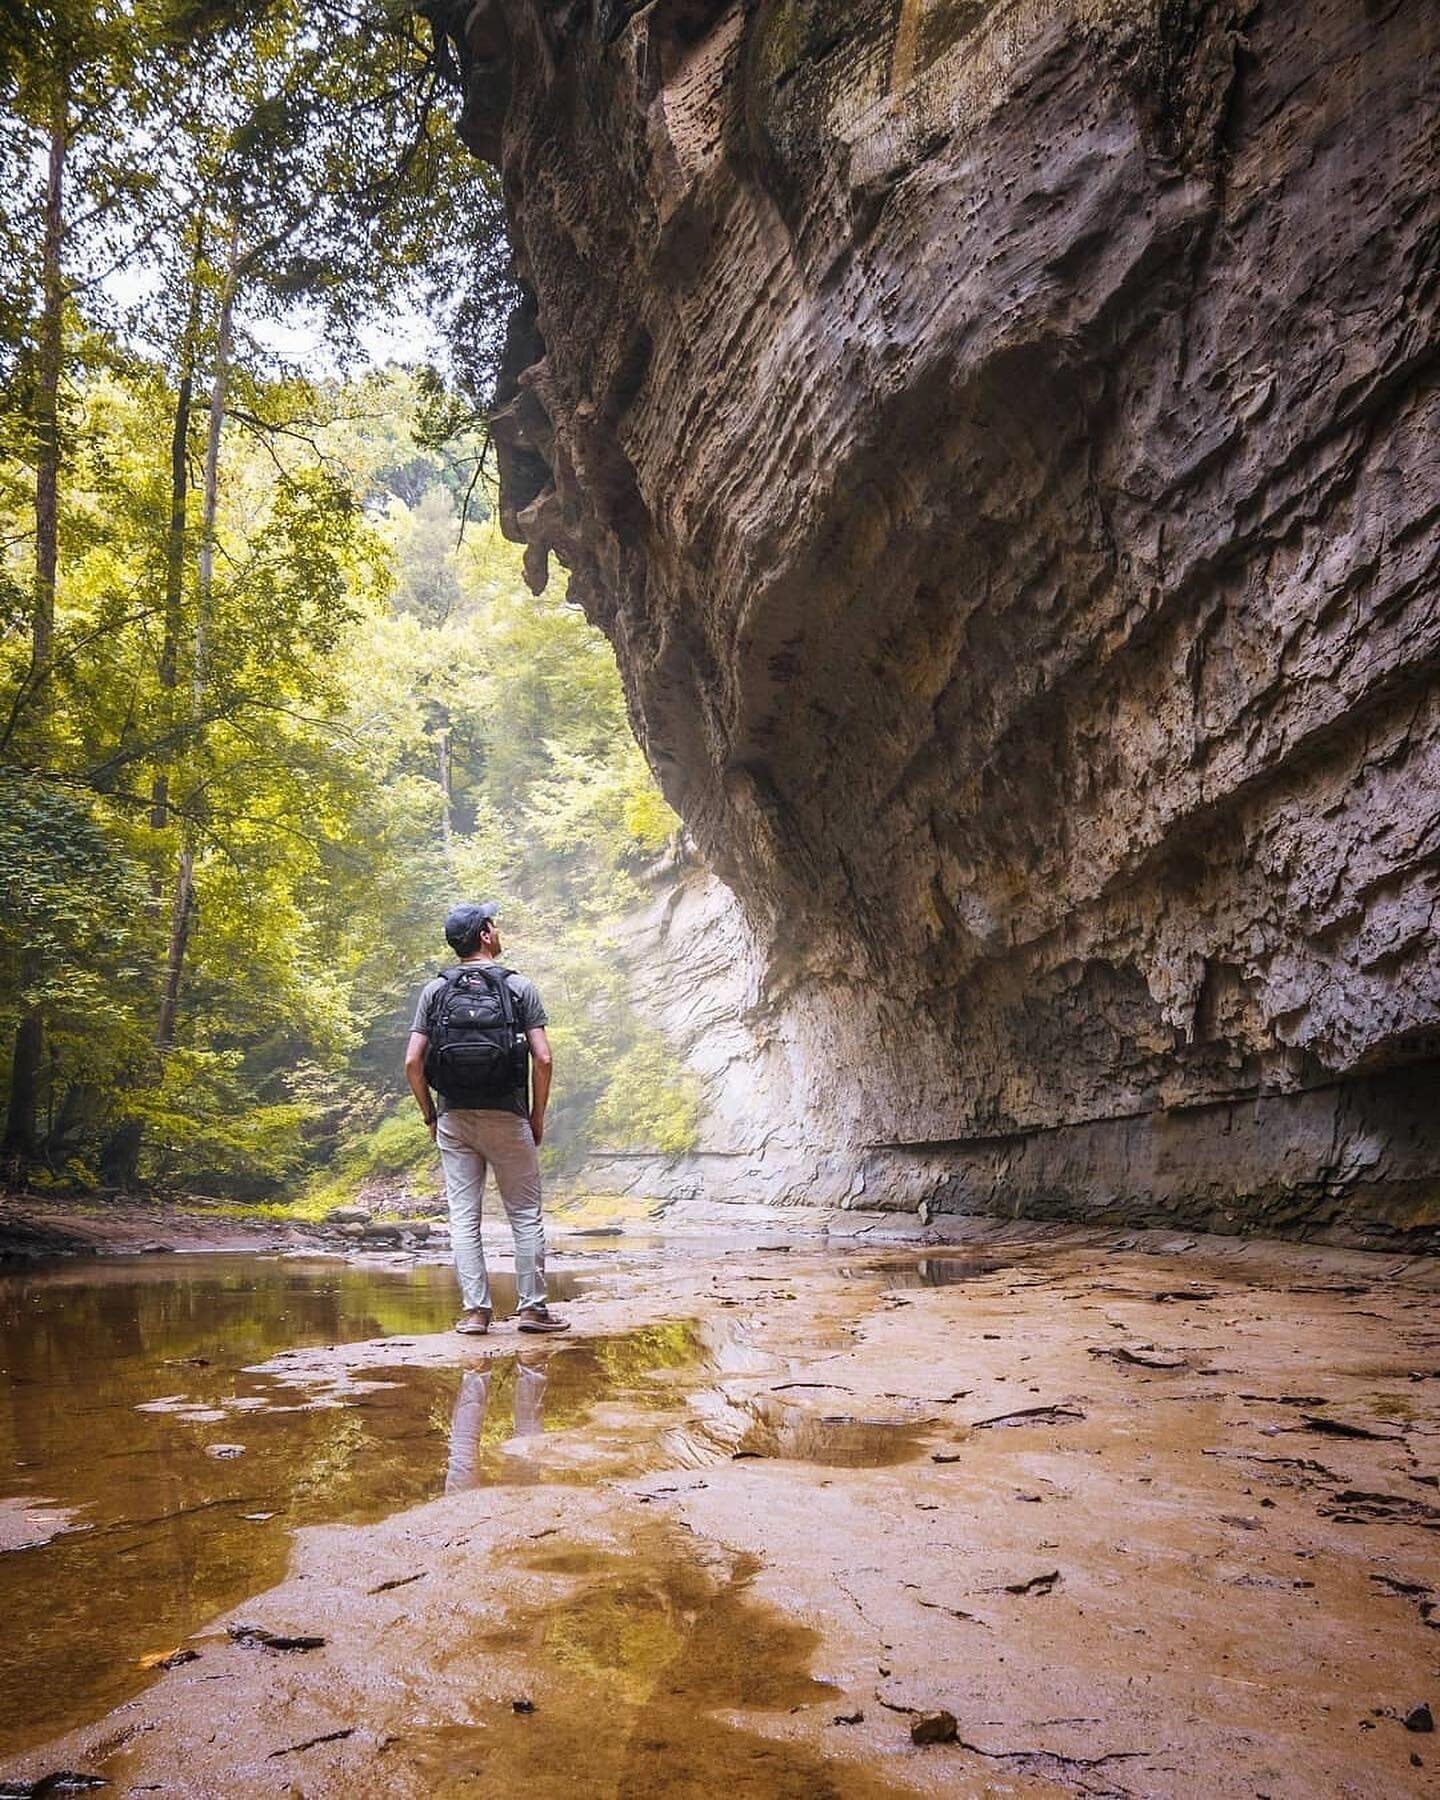 Have you visited Shades State Park in Parke County, Indiana?! 🌿 

Often called &ldquo;The Less Popular Little Brother&rdquo; to Turkey Run State Park. If you&rsquo;re looking for a little more adventure, head to Shades! You&rsquo;ll find it&rsquo;s 